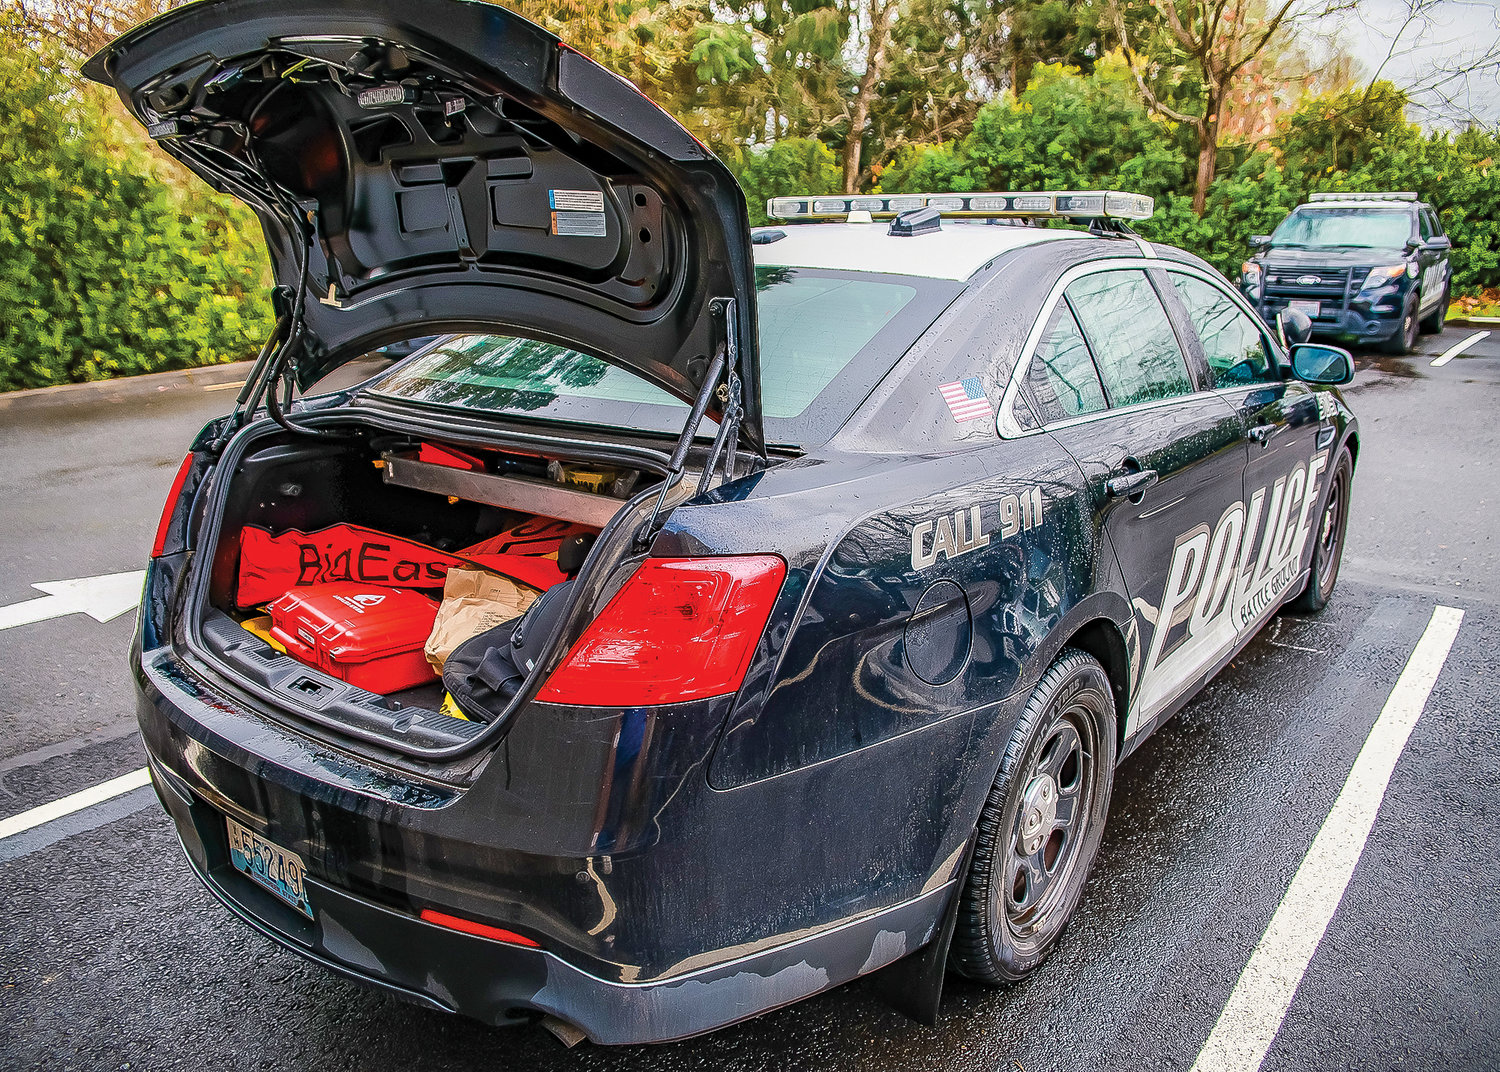 An AED unit is equipped in every Battle Ground patrol vehicle and supervisor vehicle as seen with the red container in the trunk of School Resource Officer Anderson's vehicle on Friday, March 10.